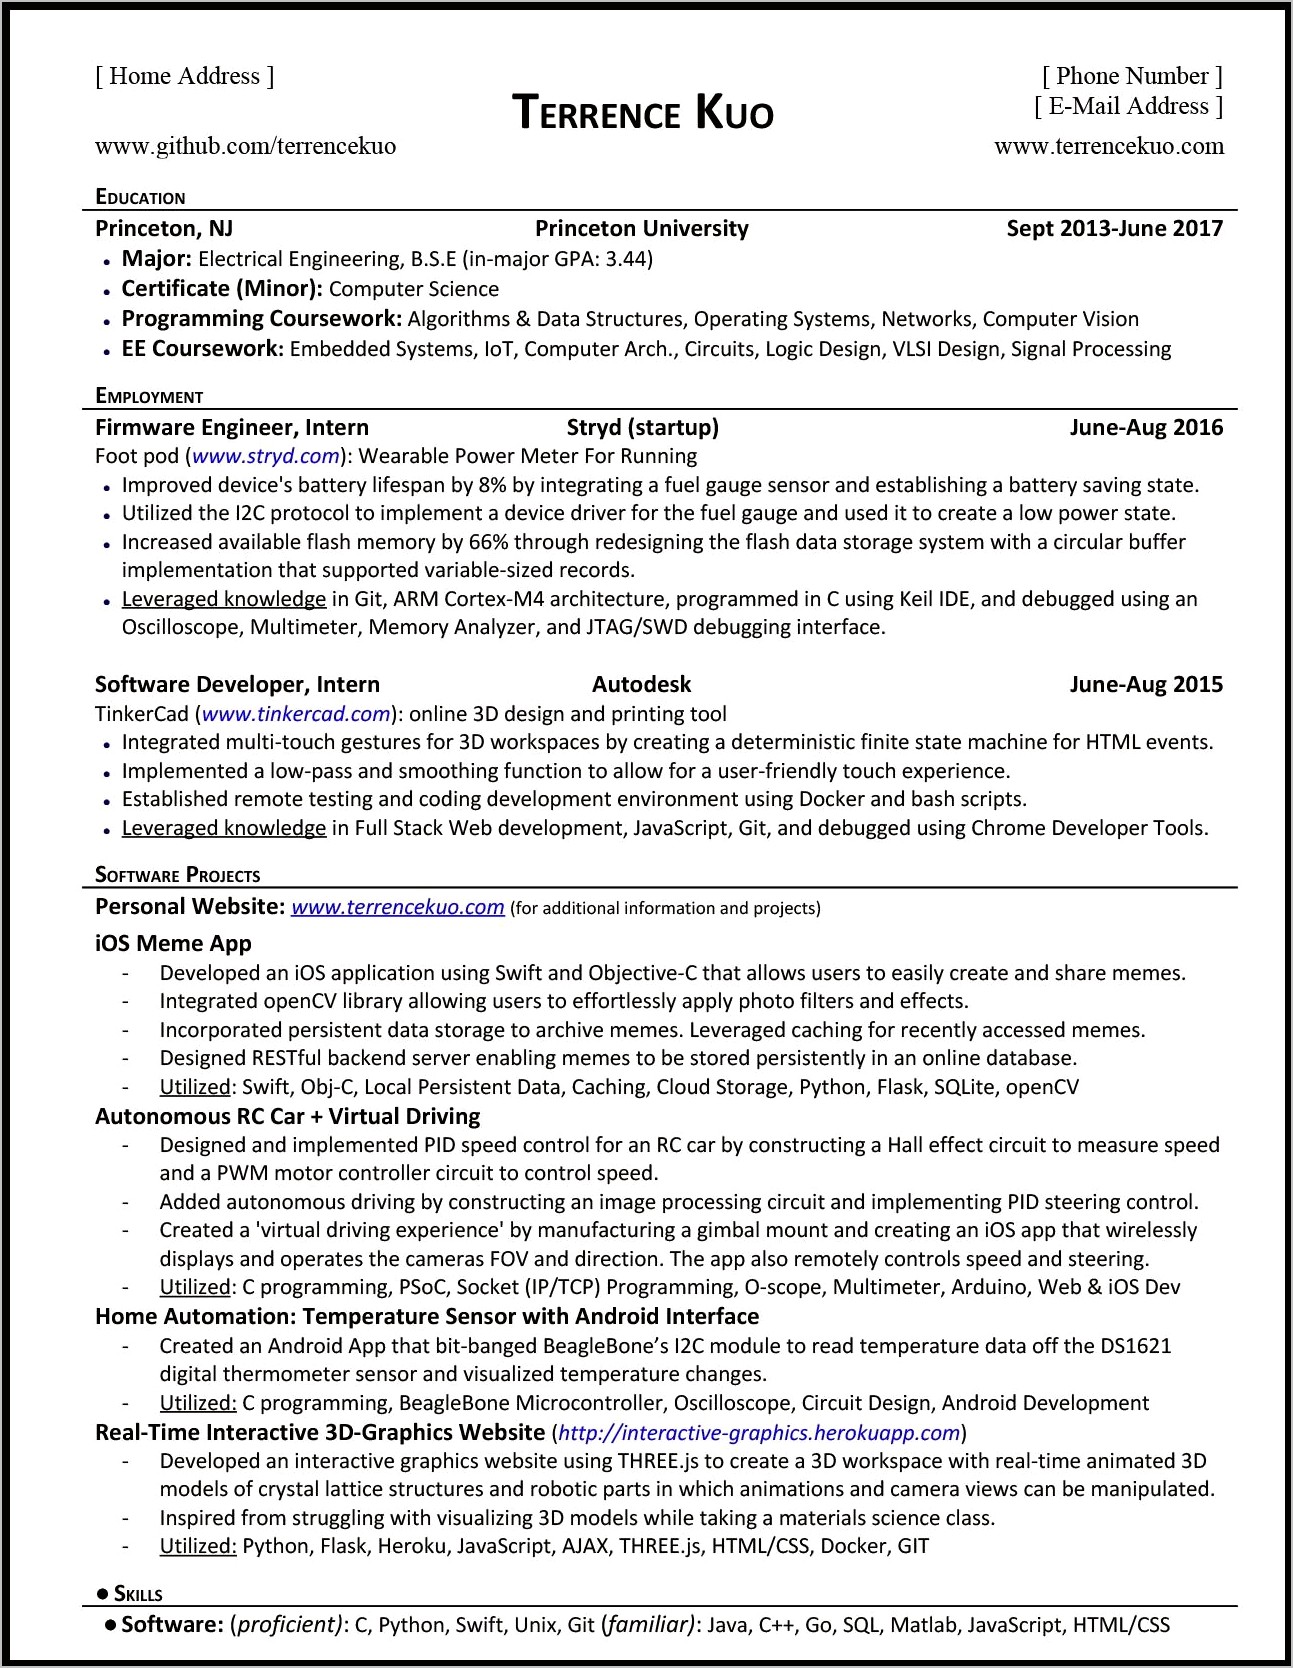 Basic Computer Knowledge To Put On Resume